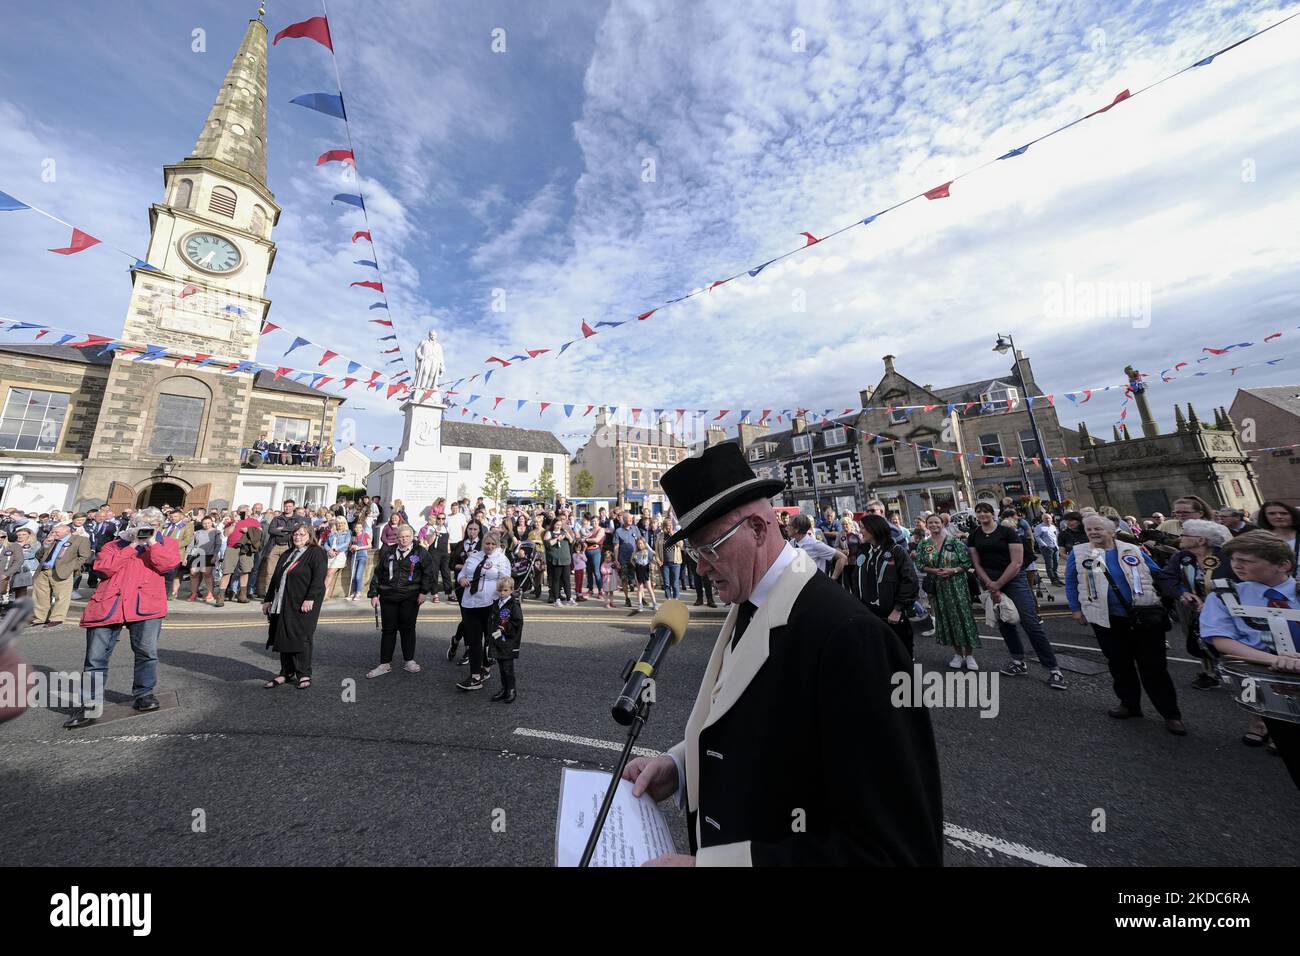 Selkirk, UK. 16.Jun.2022. Selkirk Common Riding 2022. Thursday, The Night afore the Morn. Senior Burgh Officer, Mr Graeme Bell led by the Flute band, preambles the streets starting in the West Port, at 1830hrs, stopping at significant junctions while walking a circuit of the Market Place, High Street, Back Row, Kirk Wynd for the “Crying of the Burley” and then onwards to the Victoria Halls, for the United Crafts Colour Bussin. At 2000hrs during the proceedings the Selkirk Ex-Royal Burgh Standard Bearers form up in a parade to march to the 'Fletcher Memorial' and lay a wreath and mark respects  Stock Photo